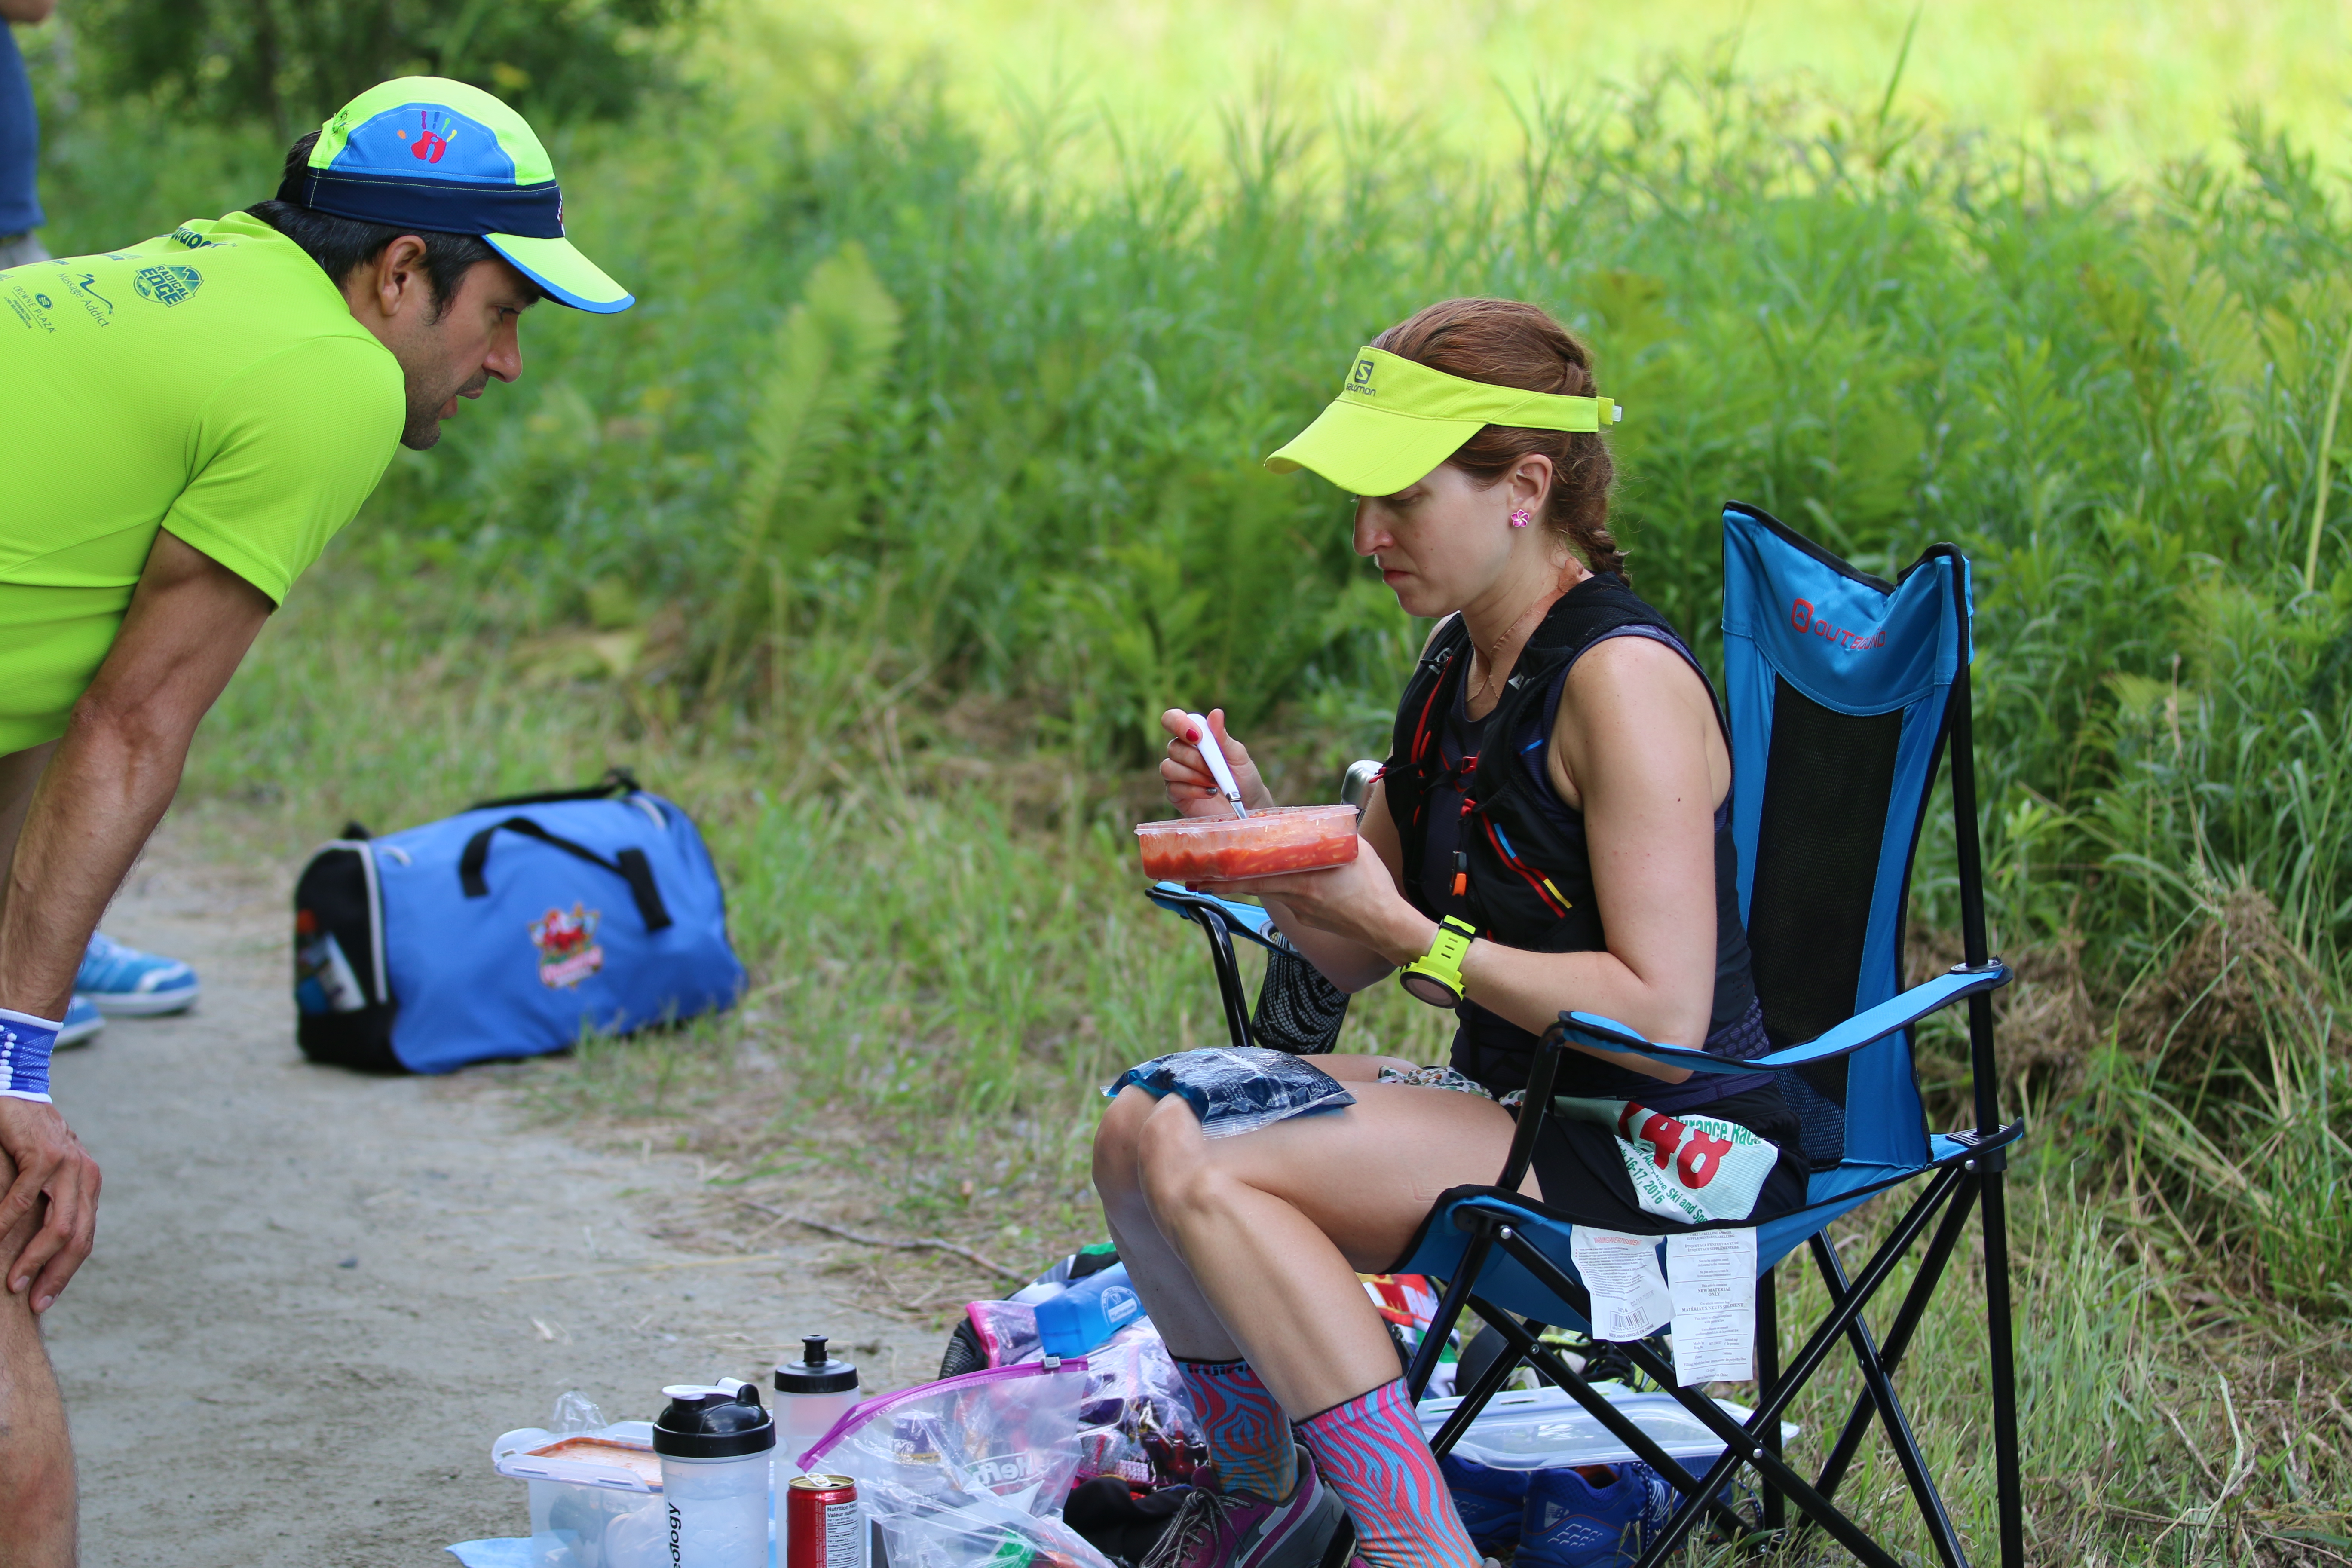 Fueling for VT100 Success